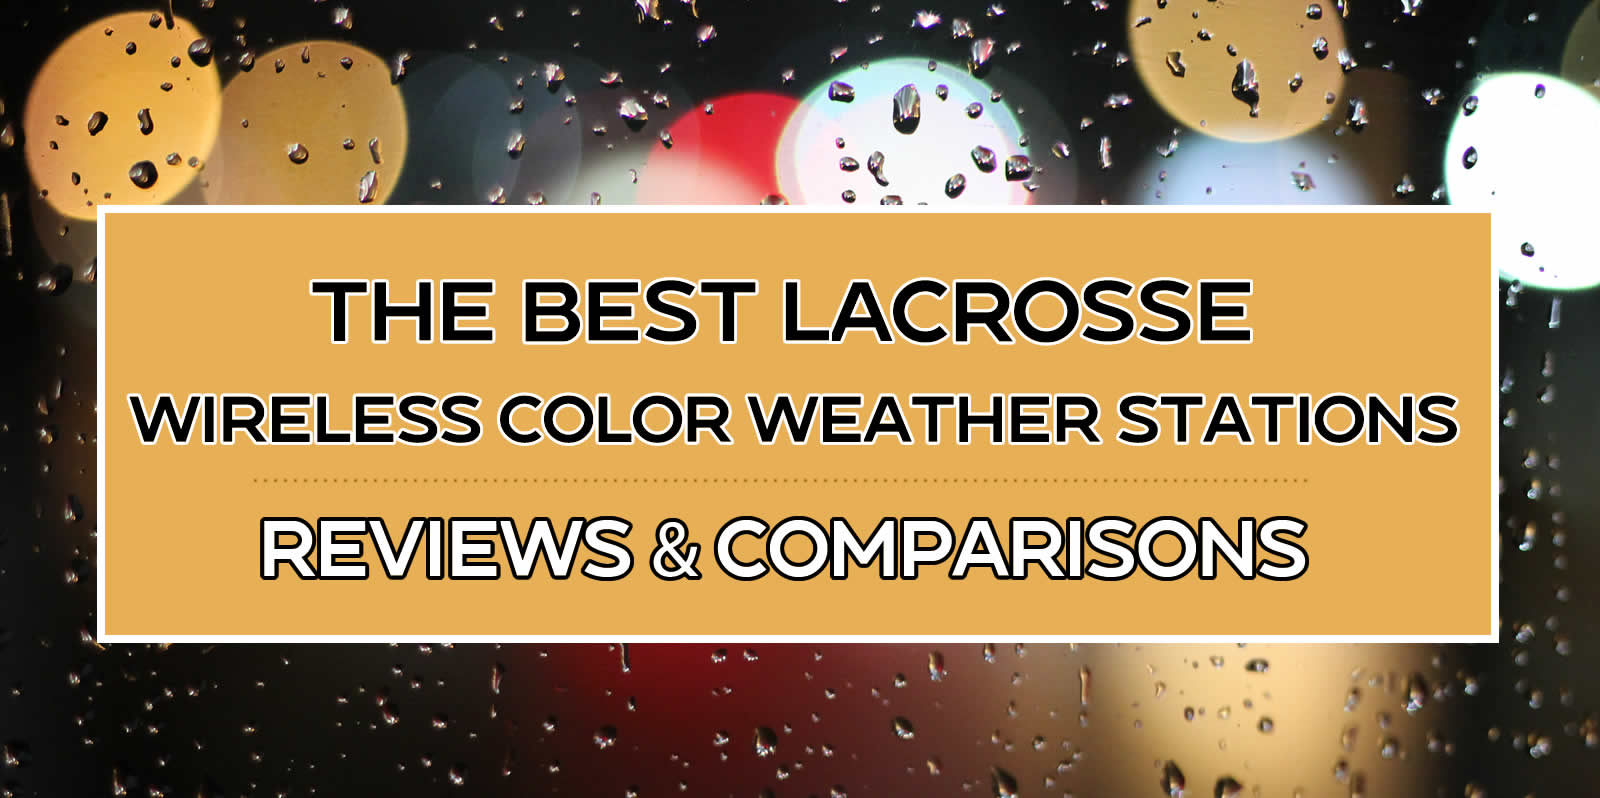 The Best Lacrosse Wireless Color Weather Station: Reviews and Comparisons